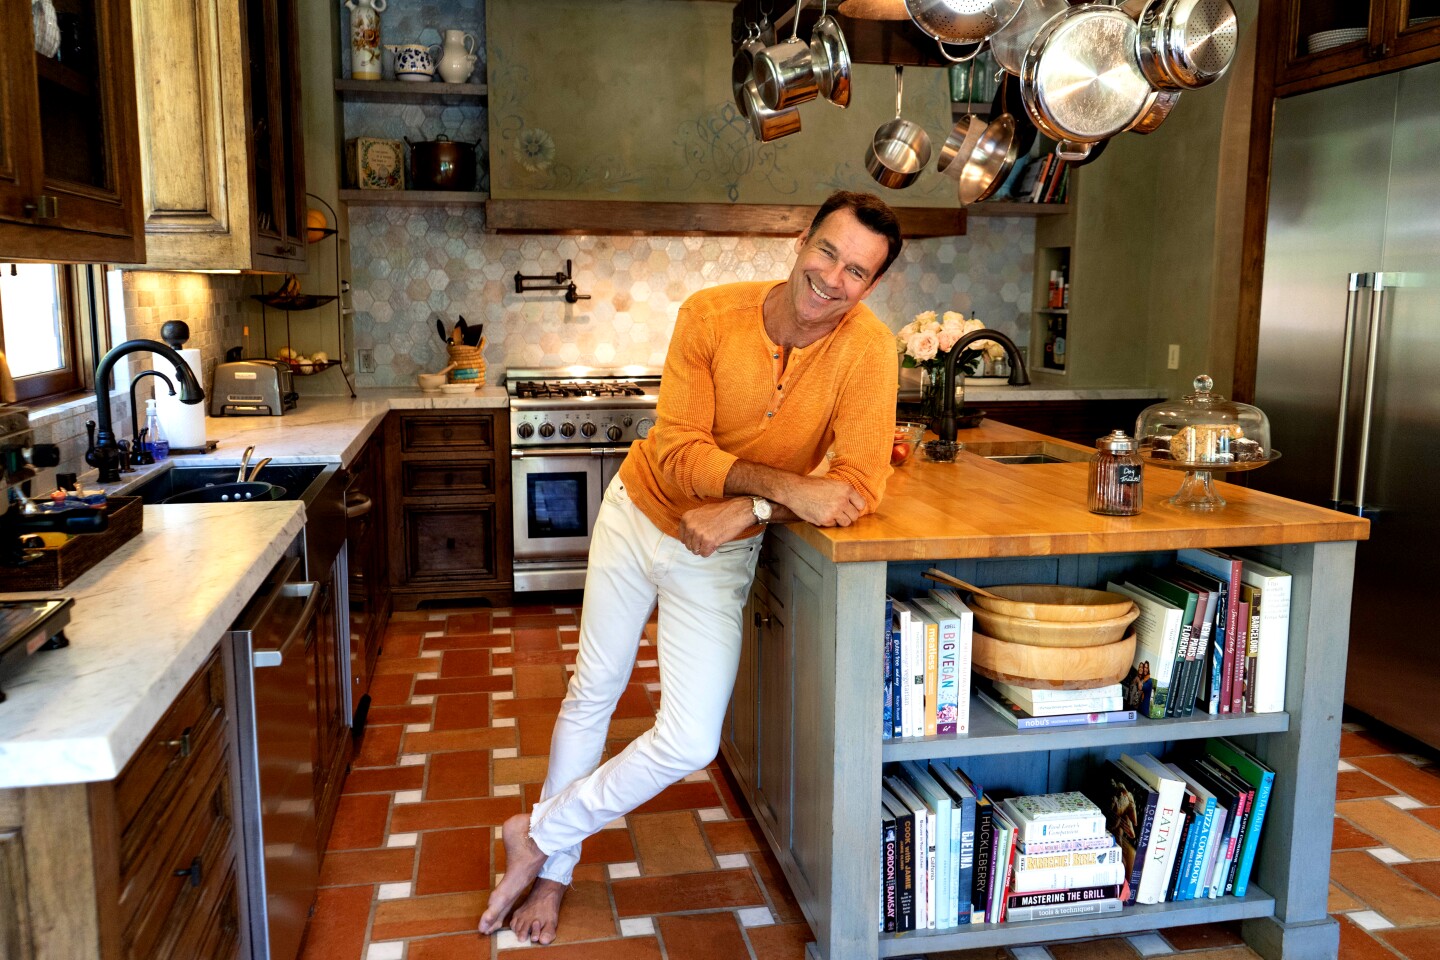 Actor David James Elliott is married to entrepreneur Nanci Chambers, and she and Elliott share their 8,000-square-foot Italian villa-style home with their 16-year old son and a menagerie that includes two dogs, two rats and a lizard. Photographed June 12, 2019. (Jesse Goddard / For The Times)